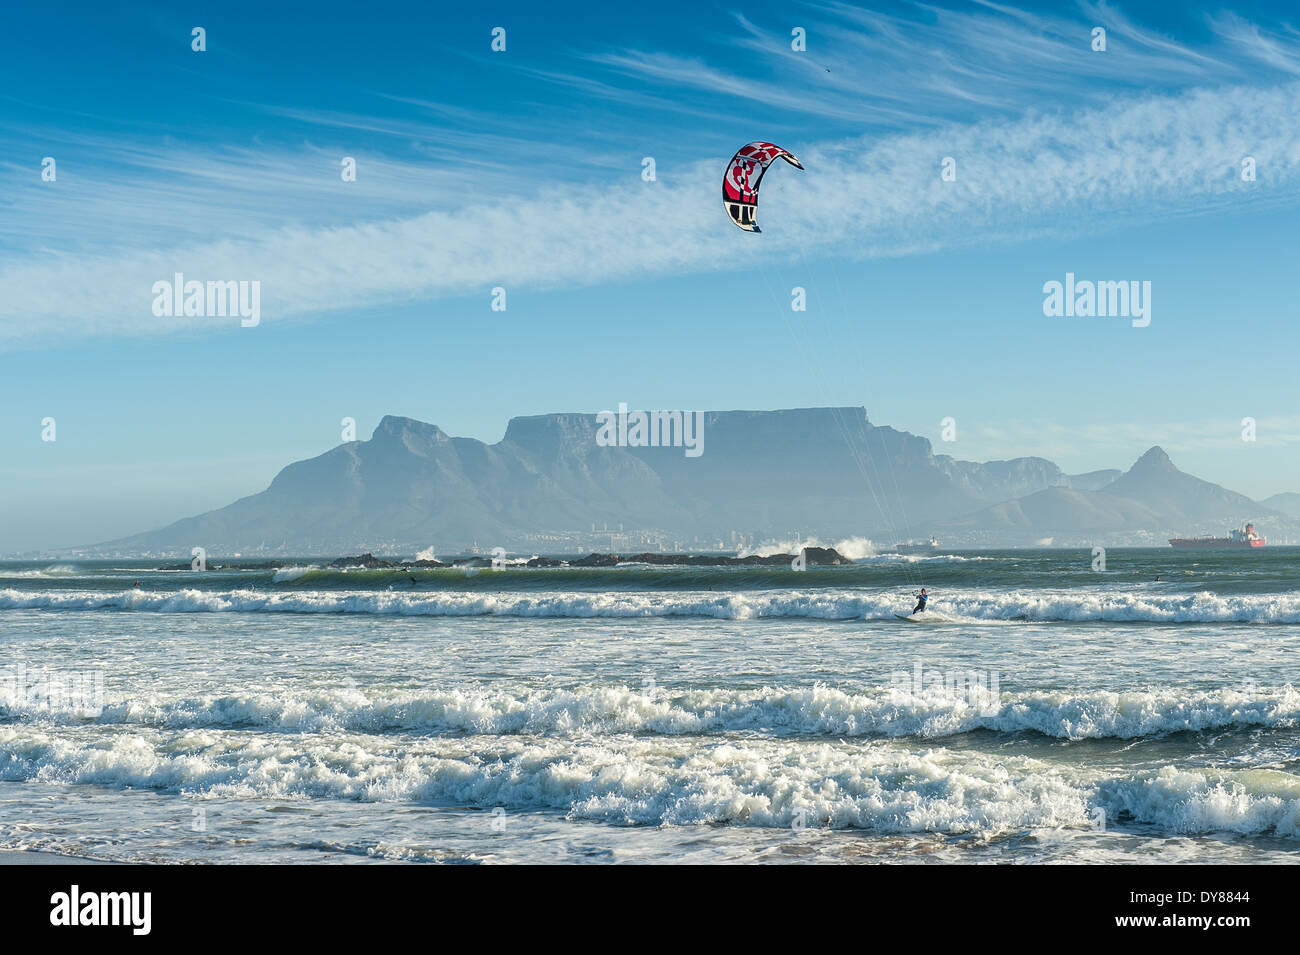 Kitesurfer in Bloubergstrand, Table Mountain in the background, South Africa Stock Photo